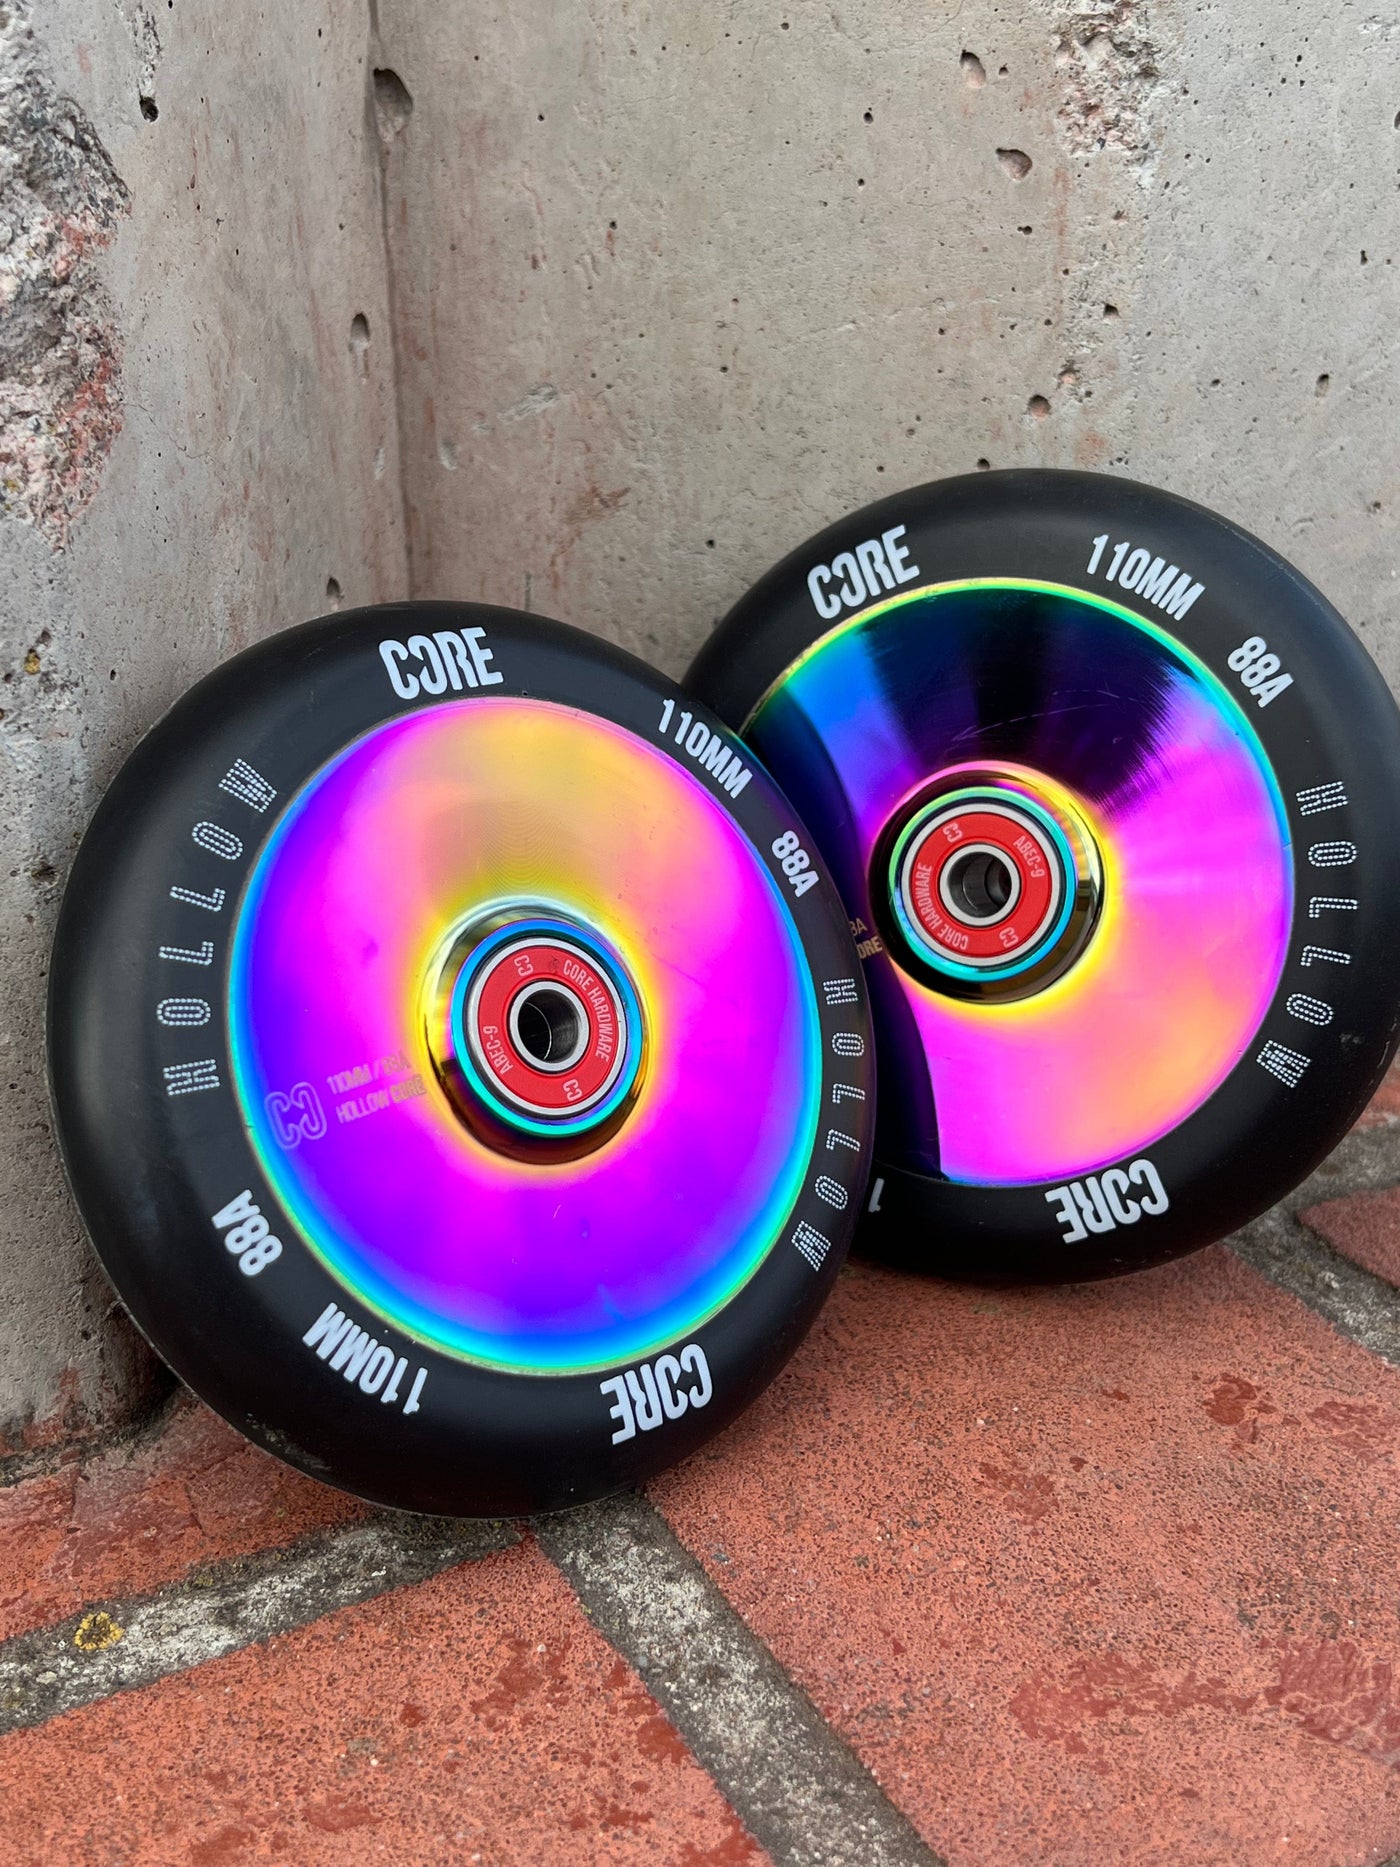 CORE Hollow V2 Neo Chrome Scooter Wheel 110mm I Stunt Scooter Wheel Leaning